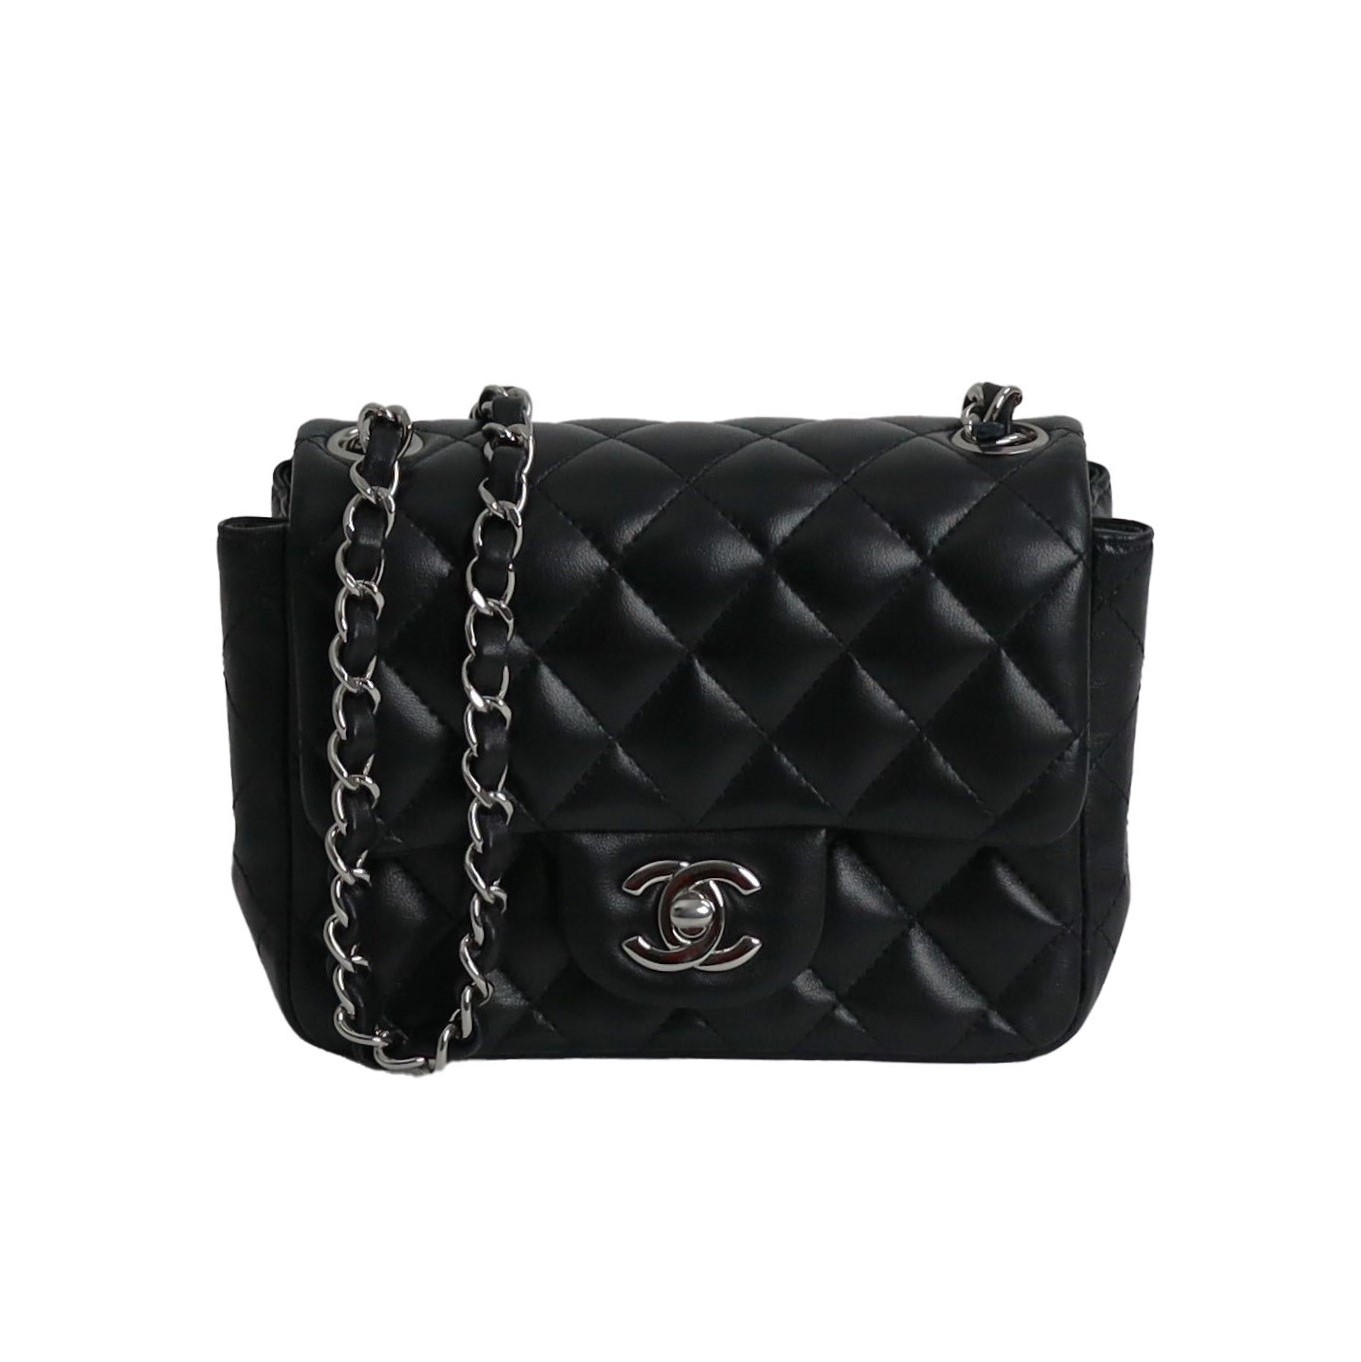 Chanel Mini Flap Bag - The A-Collection